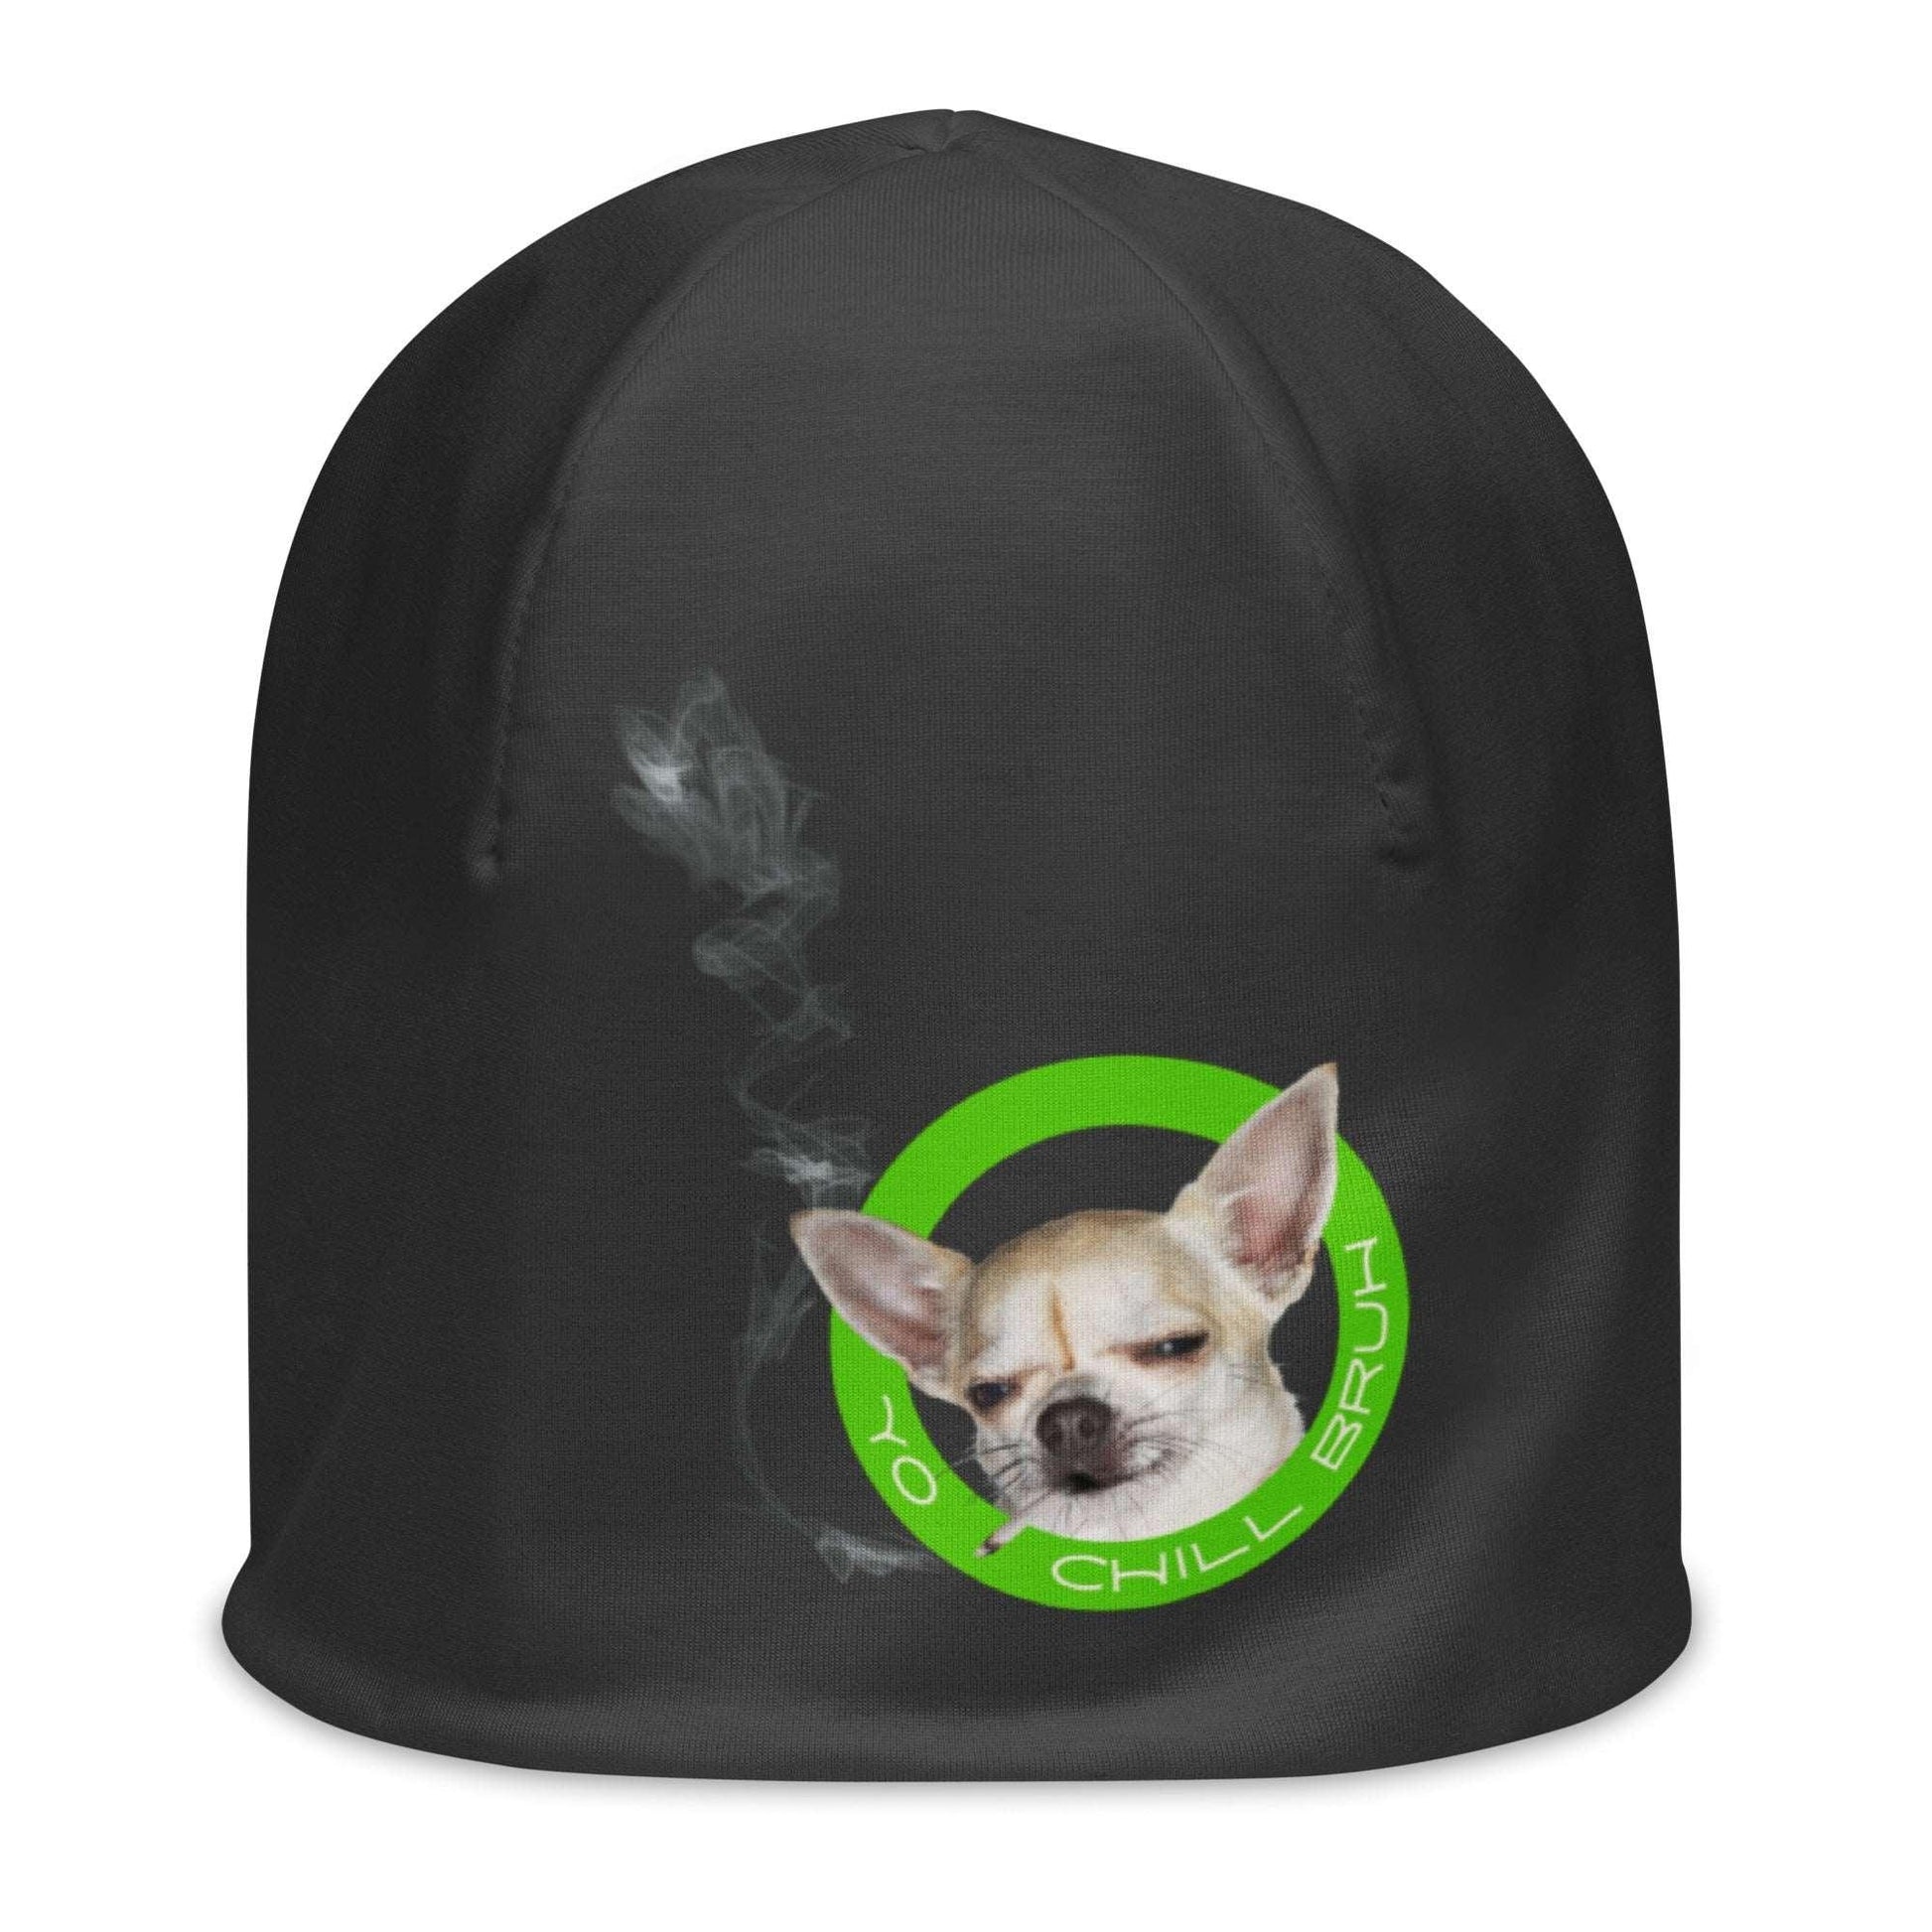 This double-layered, soft and comfy dark grey beanie features an artist's collage of a very chilled chi almost falling asleep with a smoking hand-rolled cigarette in his mouth, and the simple message: Yo chill bruh. A la Jessie in Breaking Bad. It's the coolest chihuahua meme you will find anywhere!